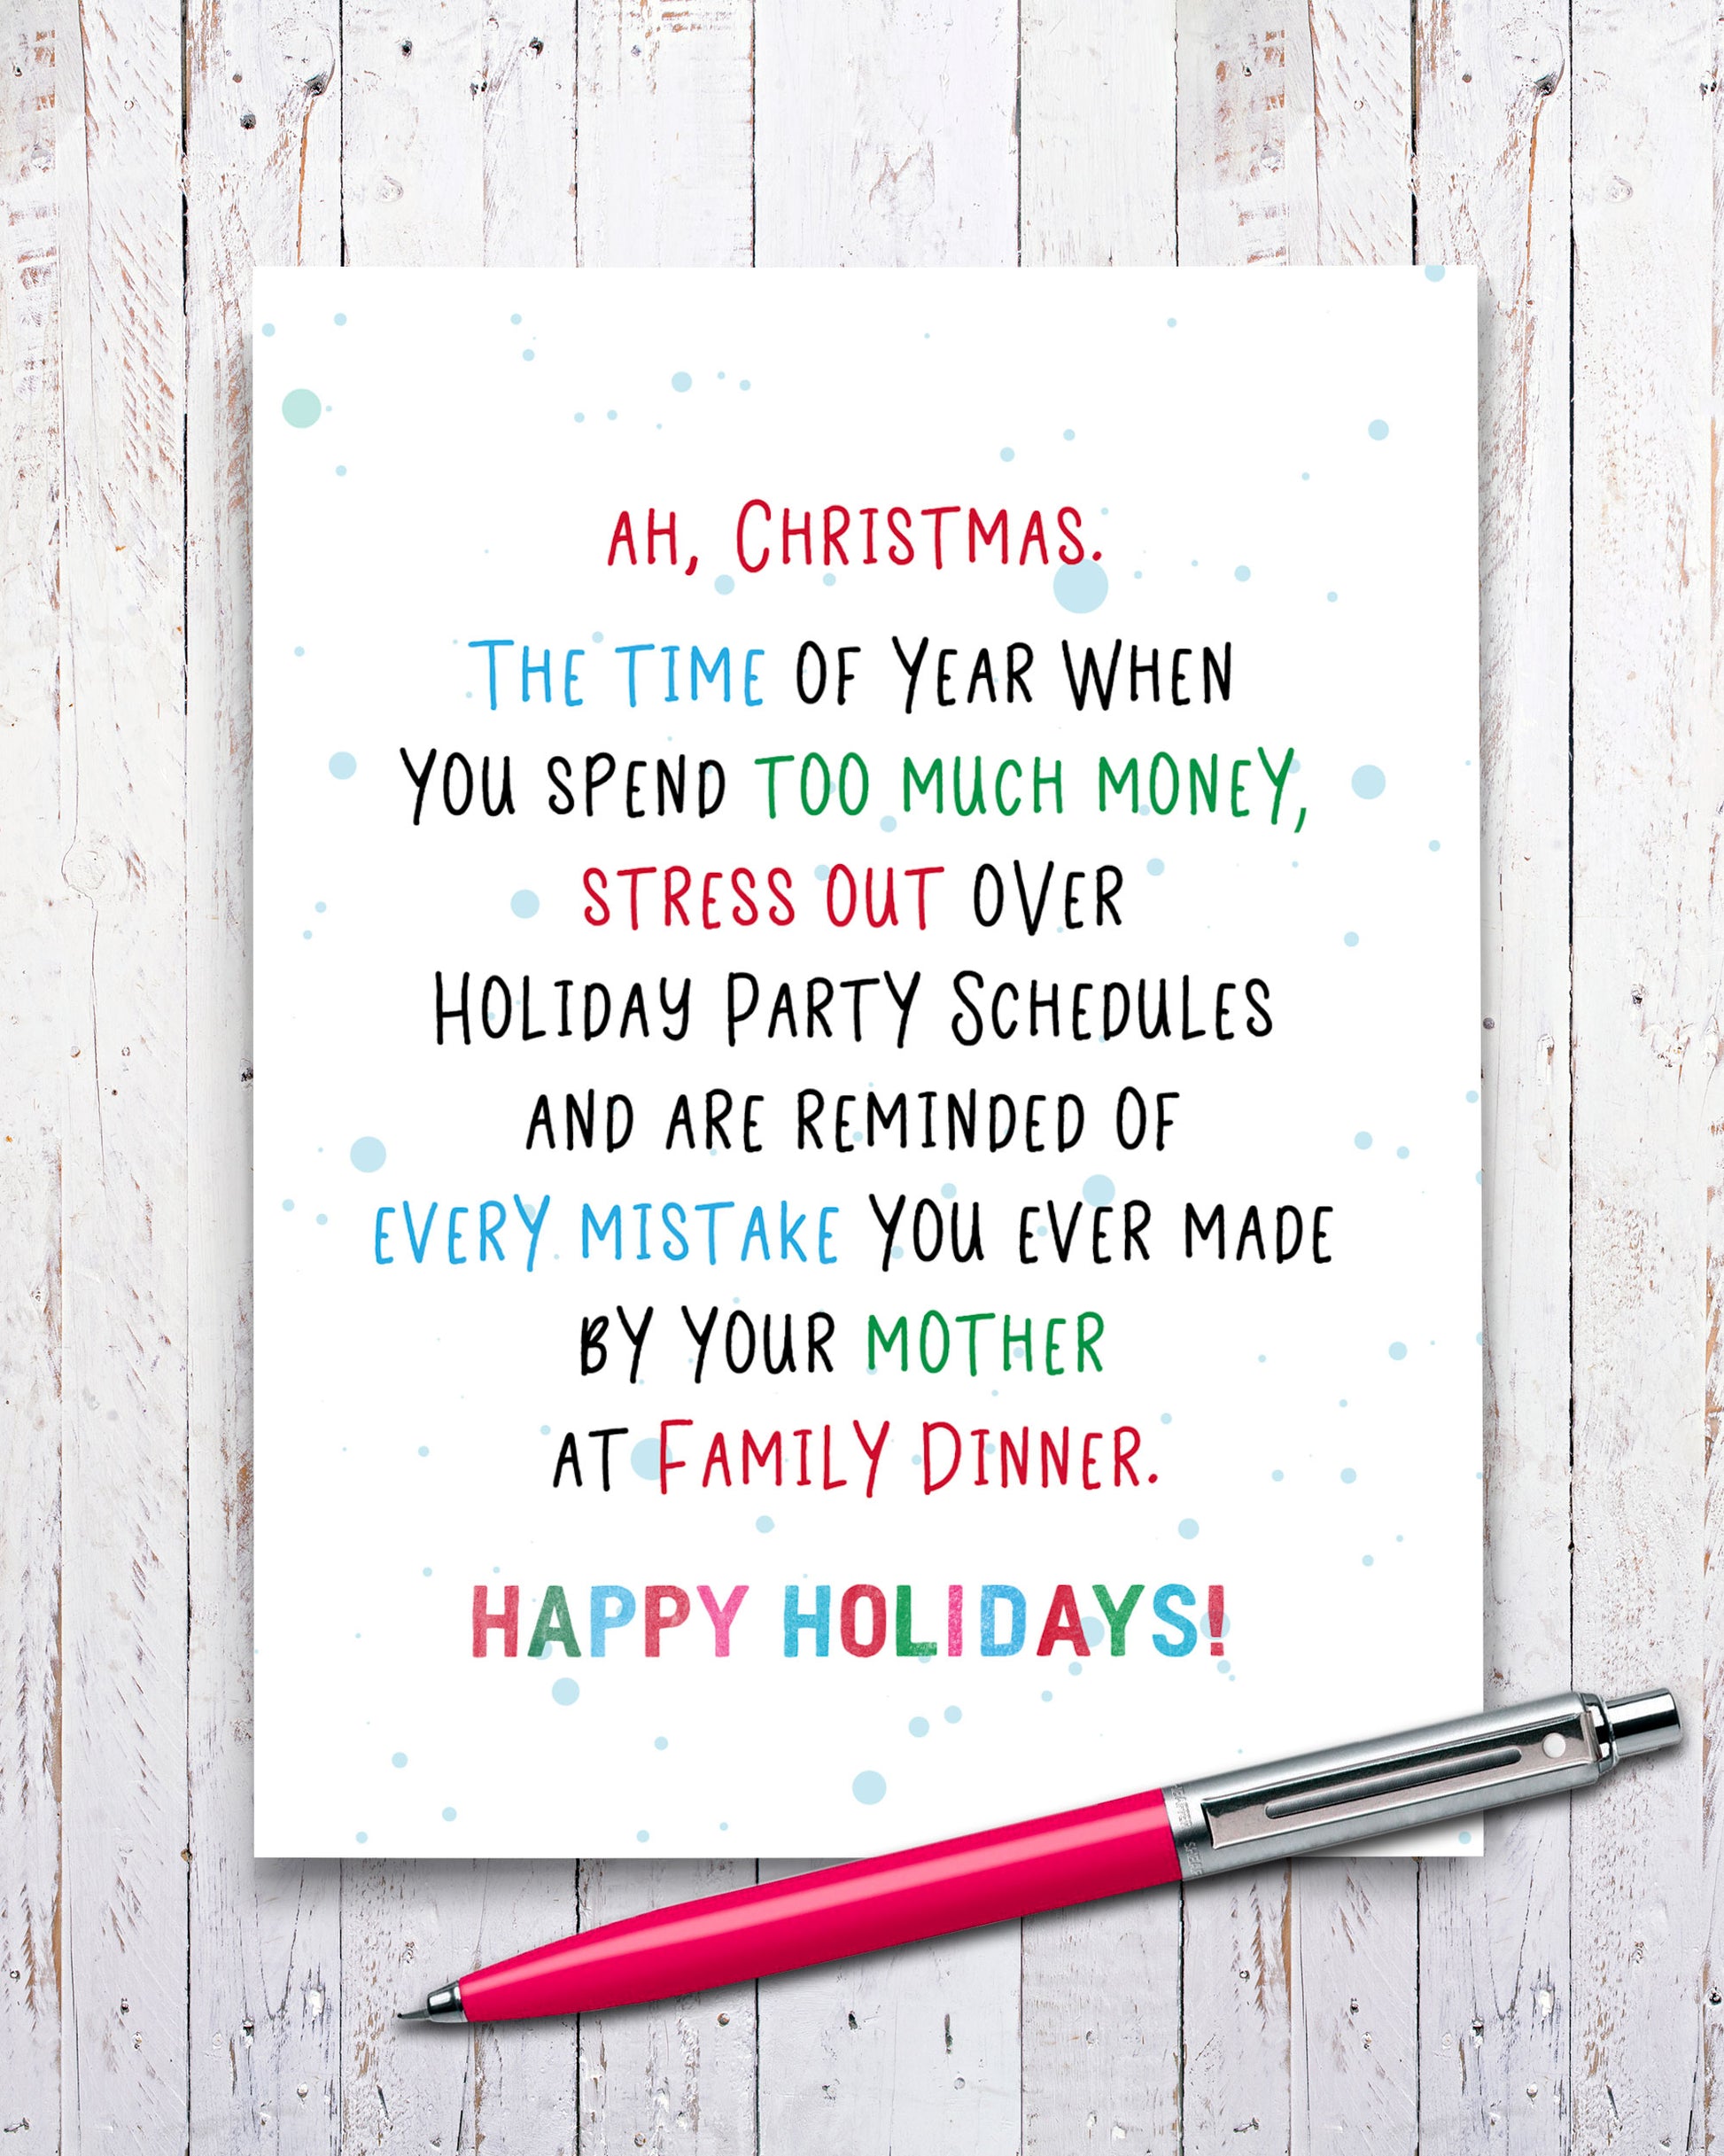 Humorous Christmas Cards, Funny Christmas Cards by Smirkantile